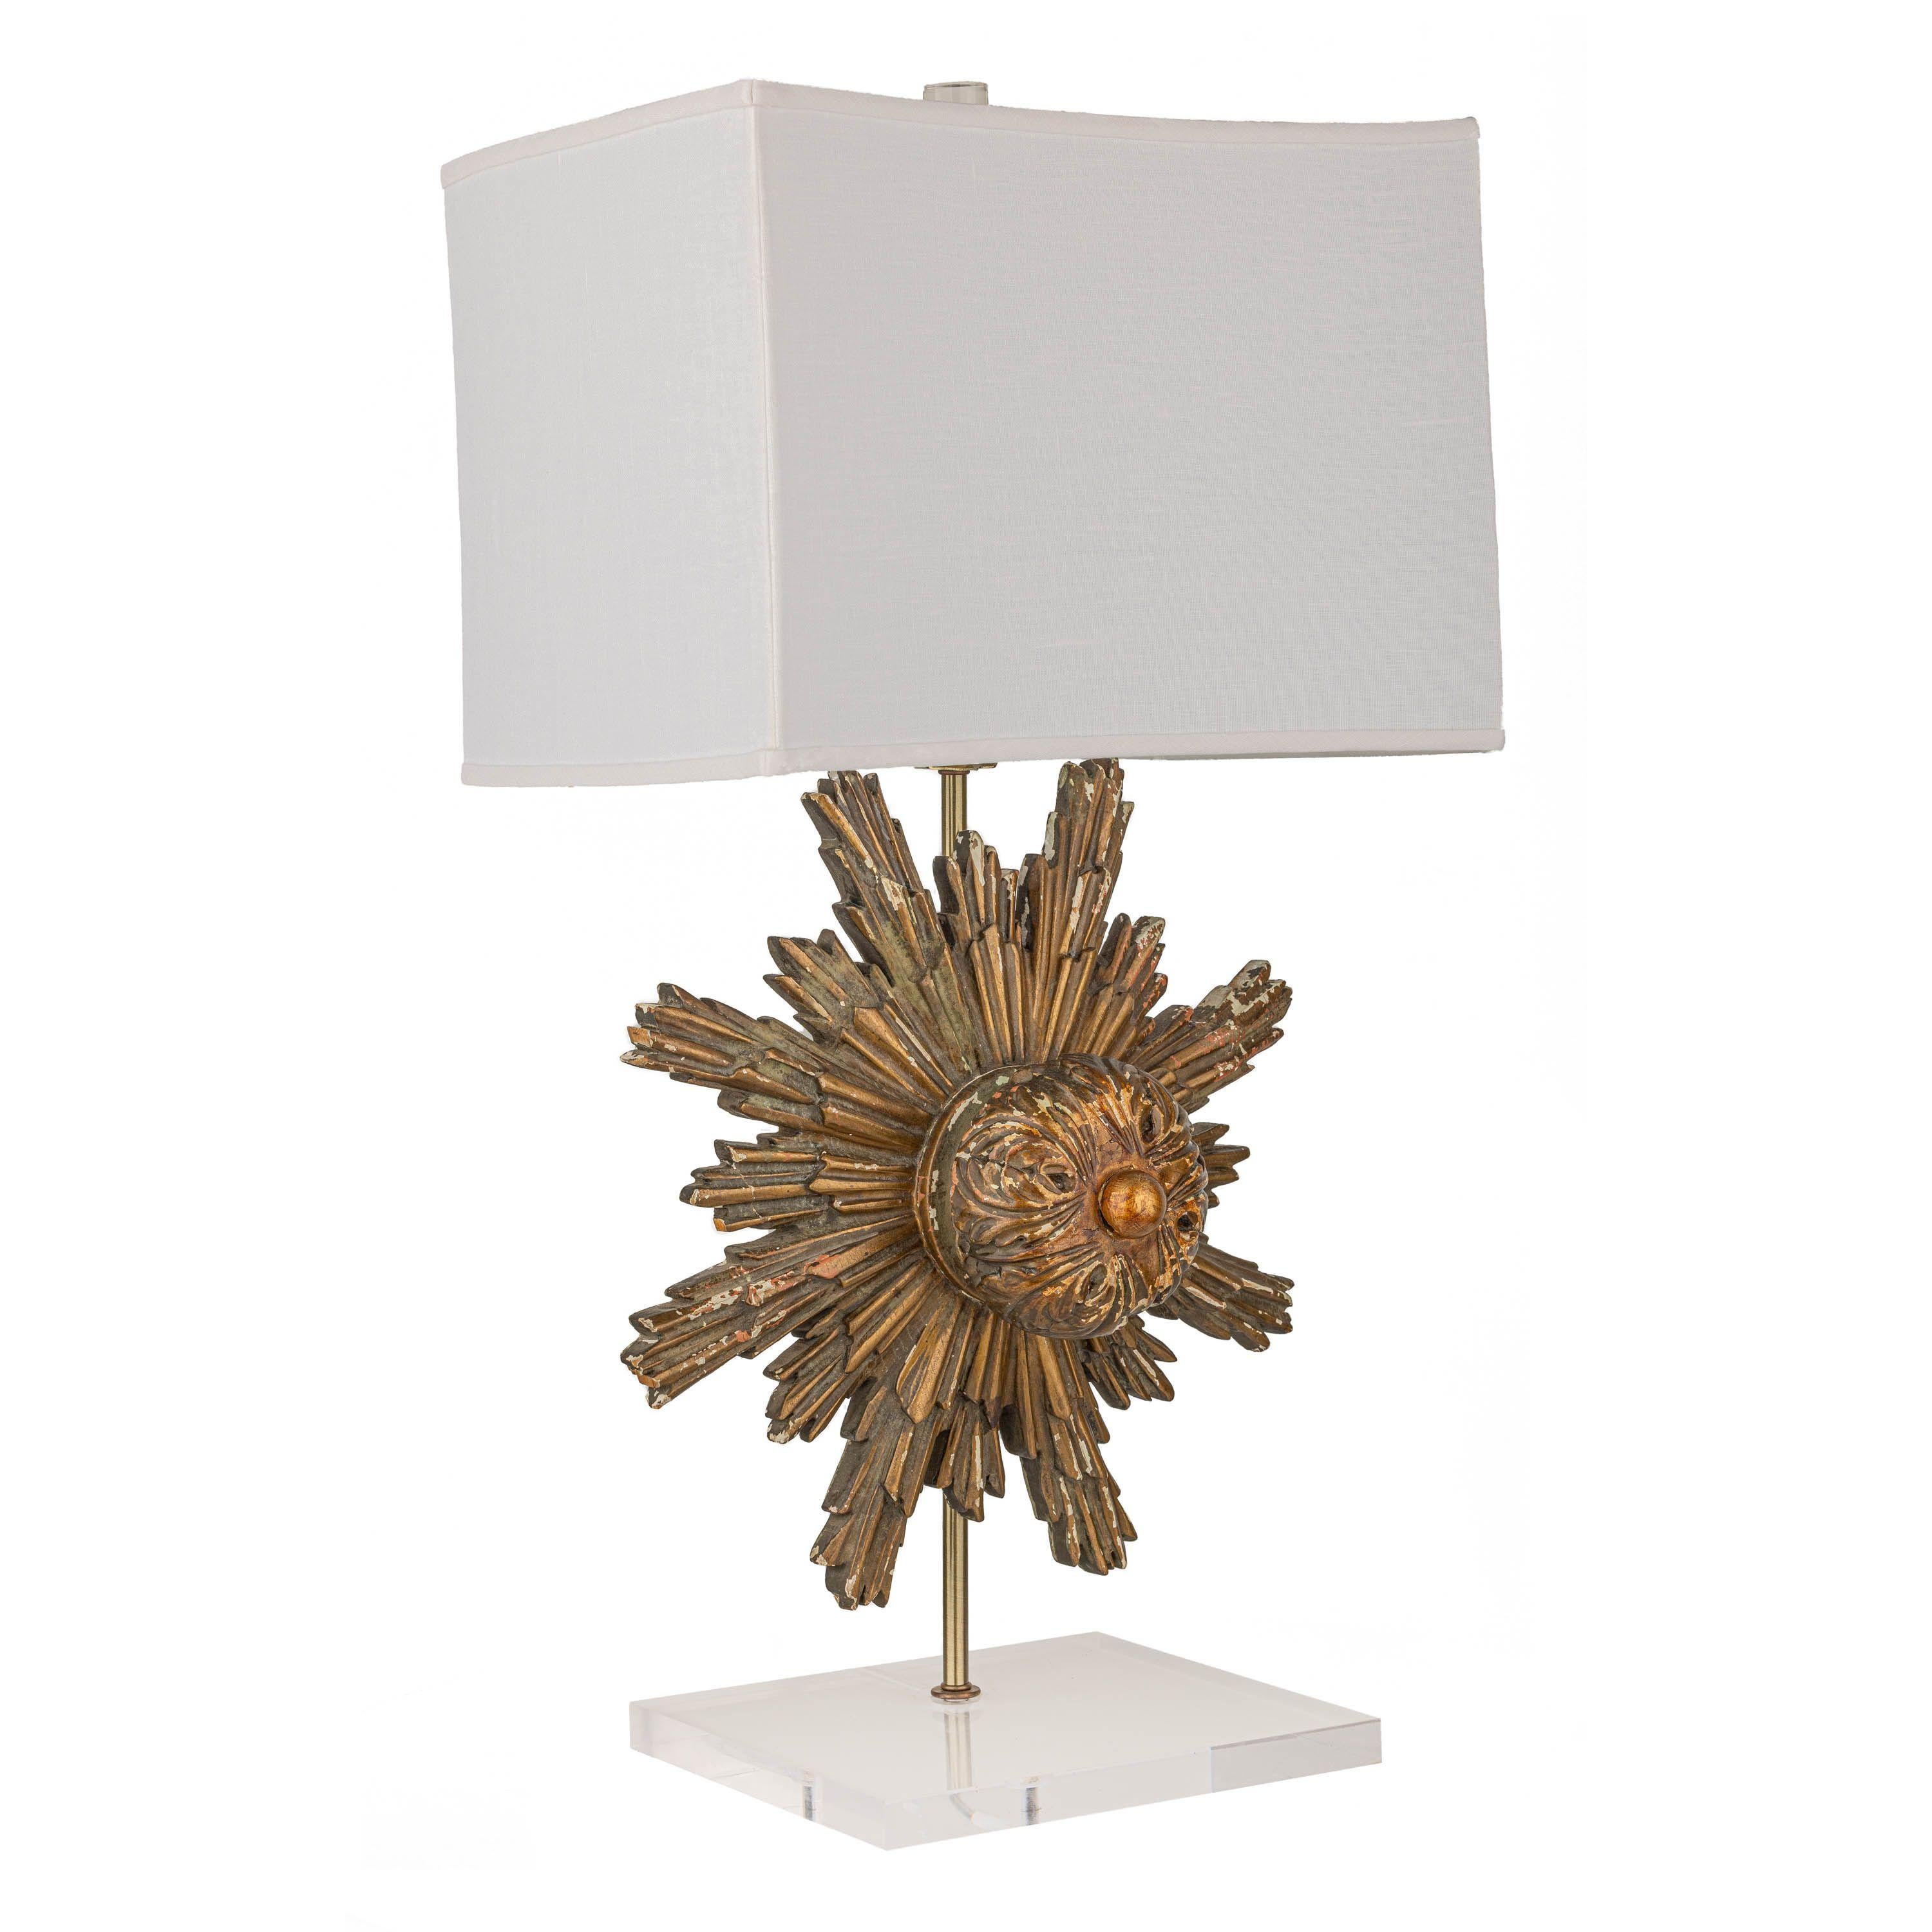 Carved three-dimensional gilt starburst attached to a metal rod and mounted on an acrylic base. Acrylic cylinder finial and white linen shade, which has a convex shape on the wide sides making this lamp truly special.
Starburst measures roughly 18